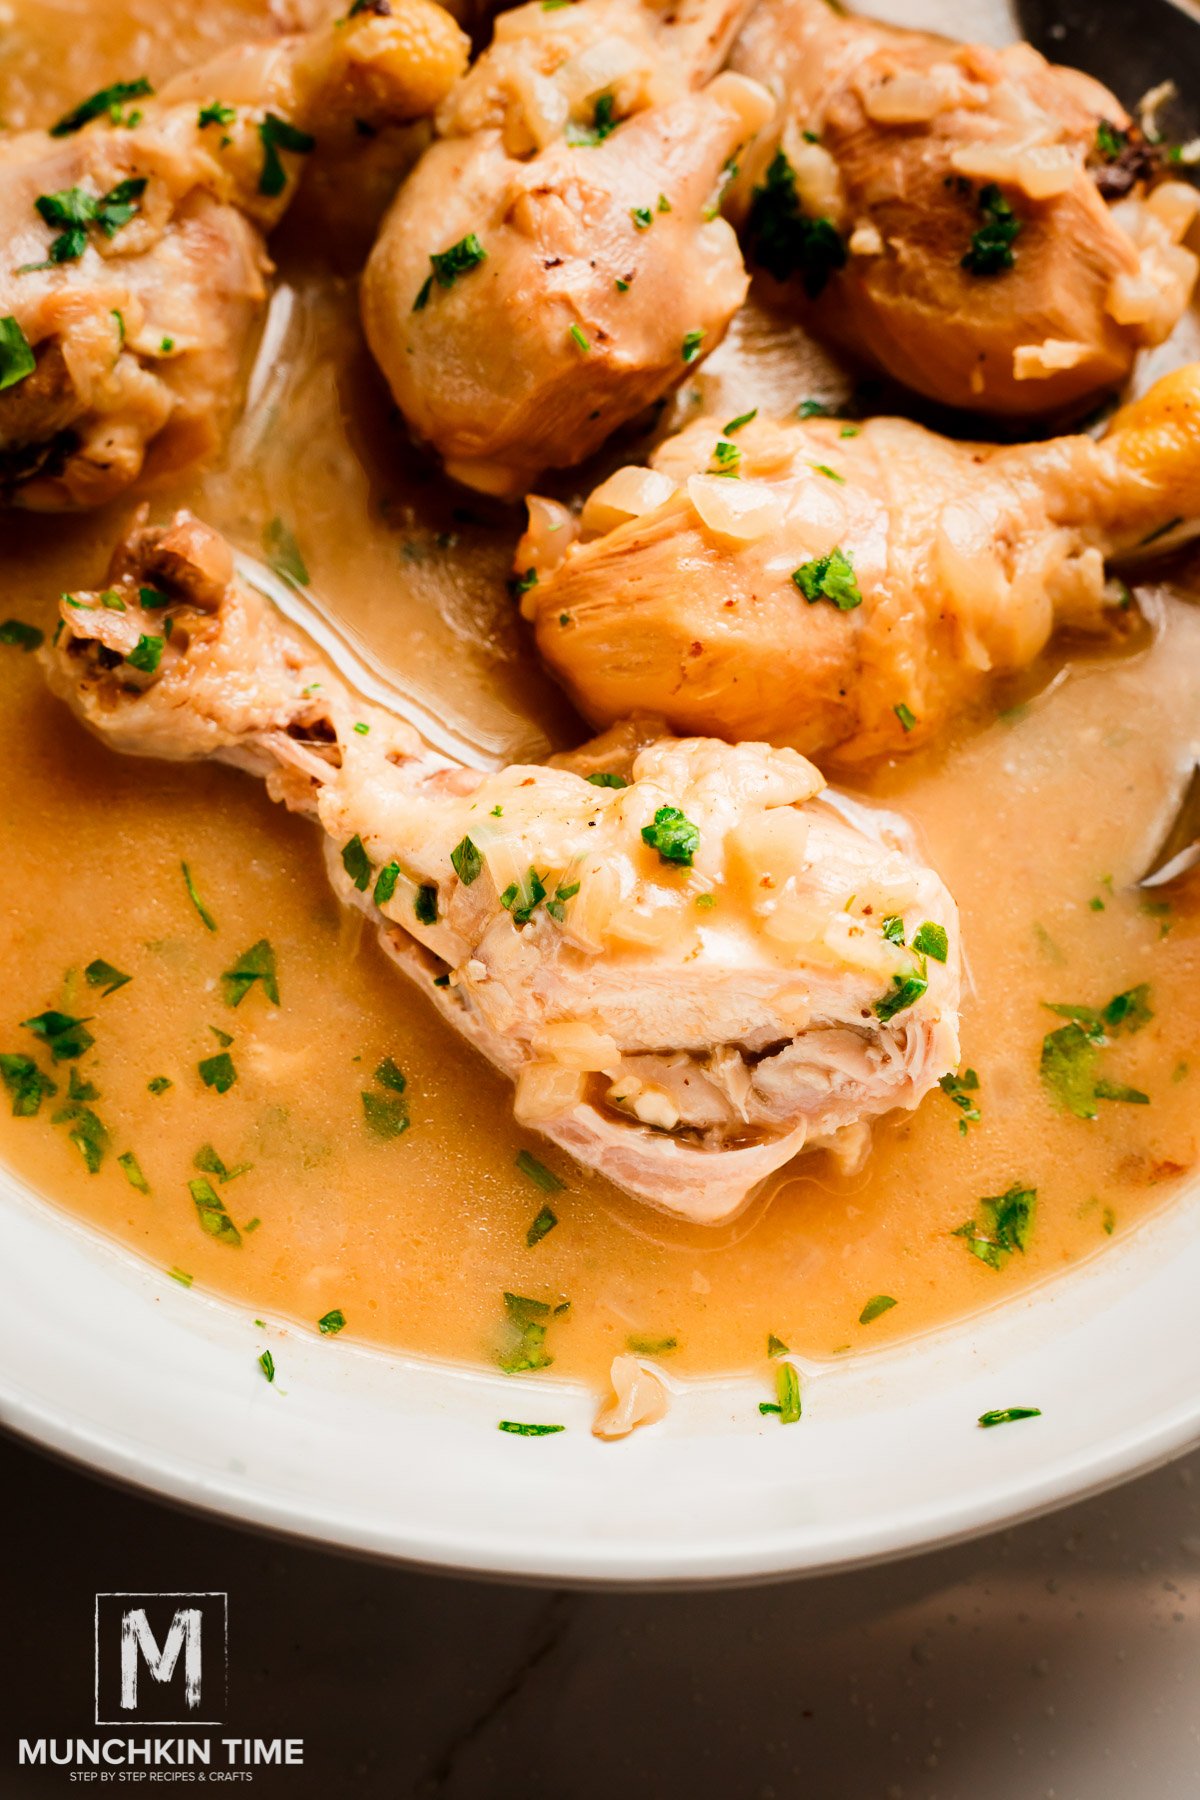 Delicious Instant Pot Chicken Drumstick in yummy dairy free sauce.